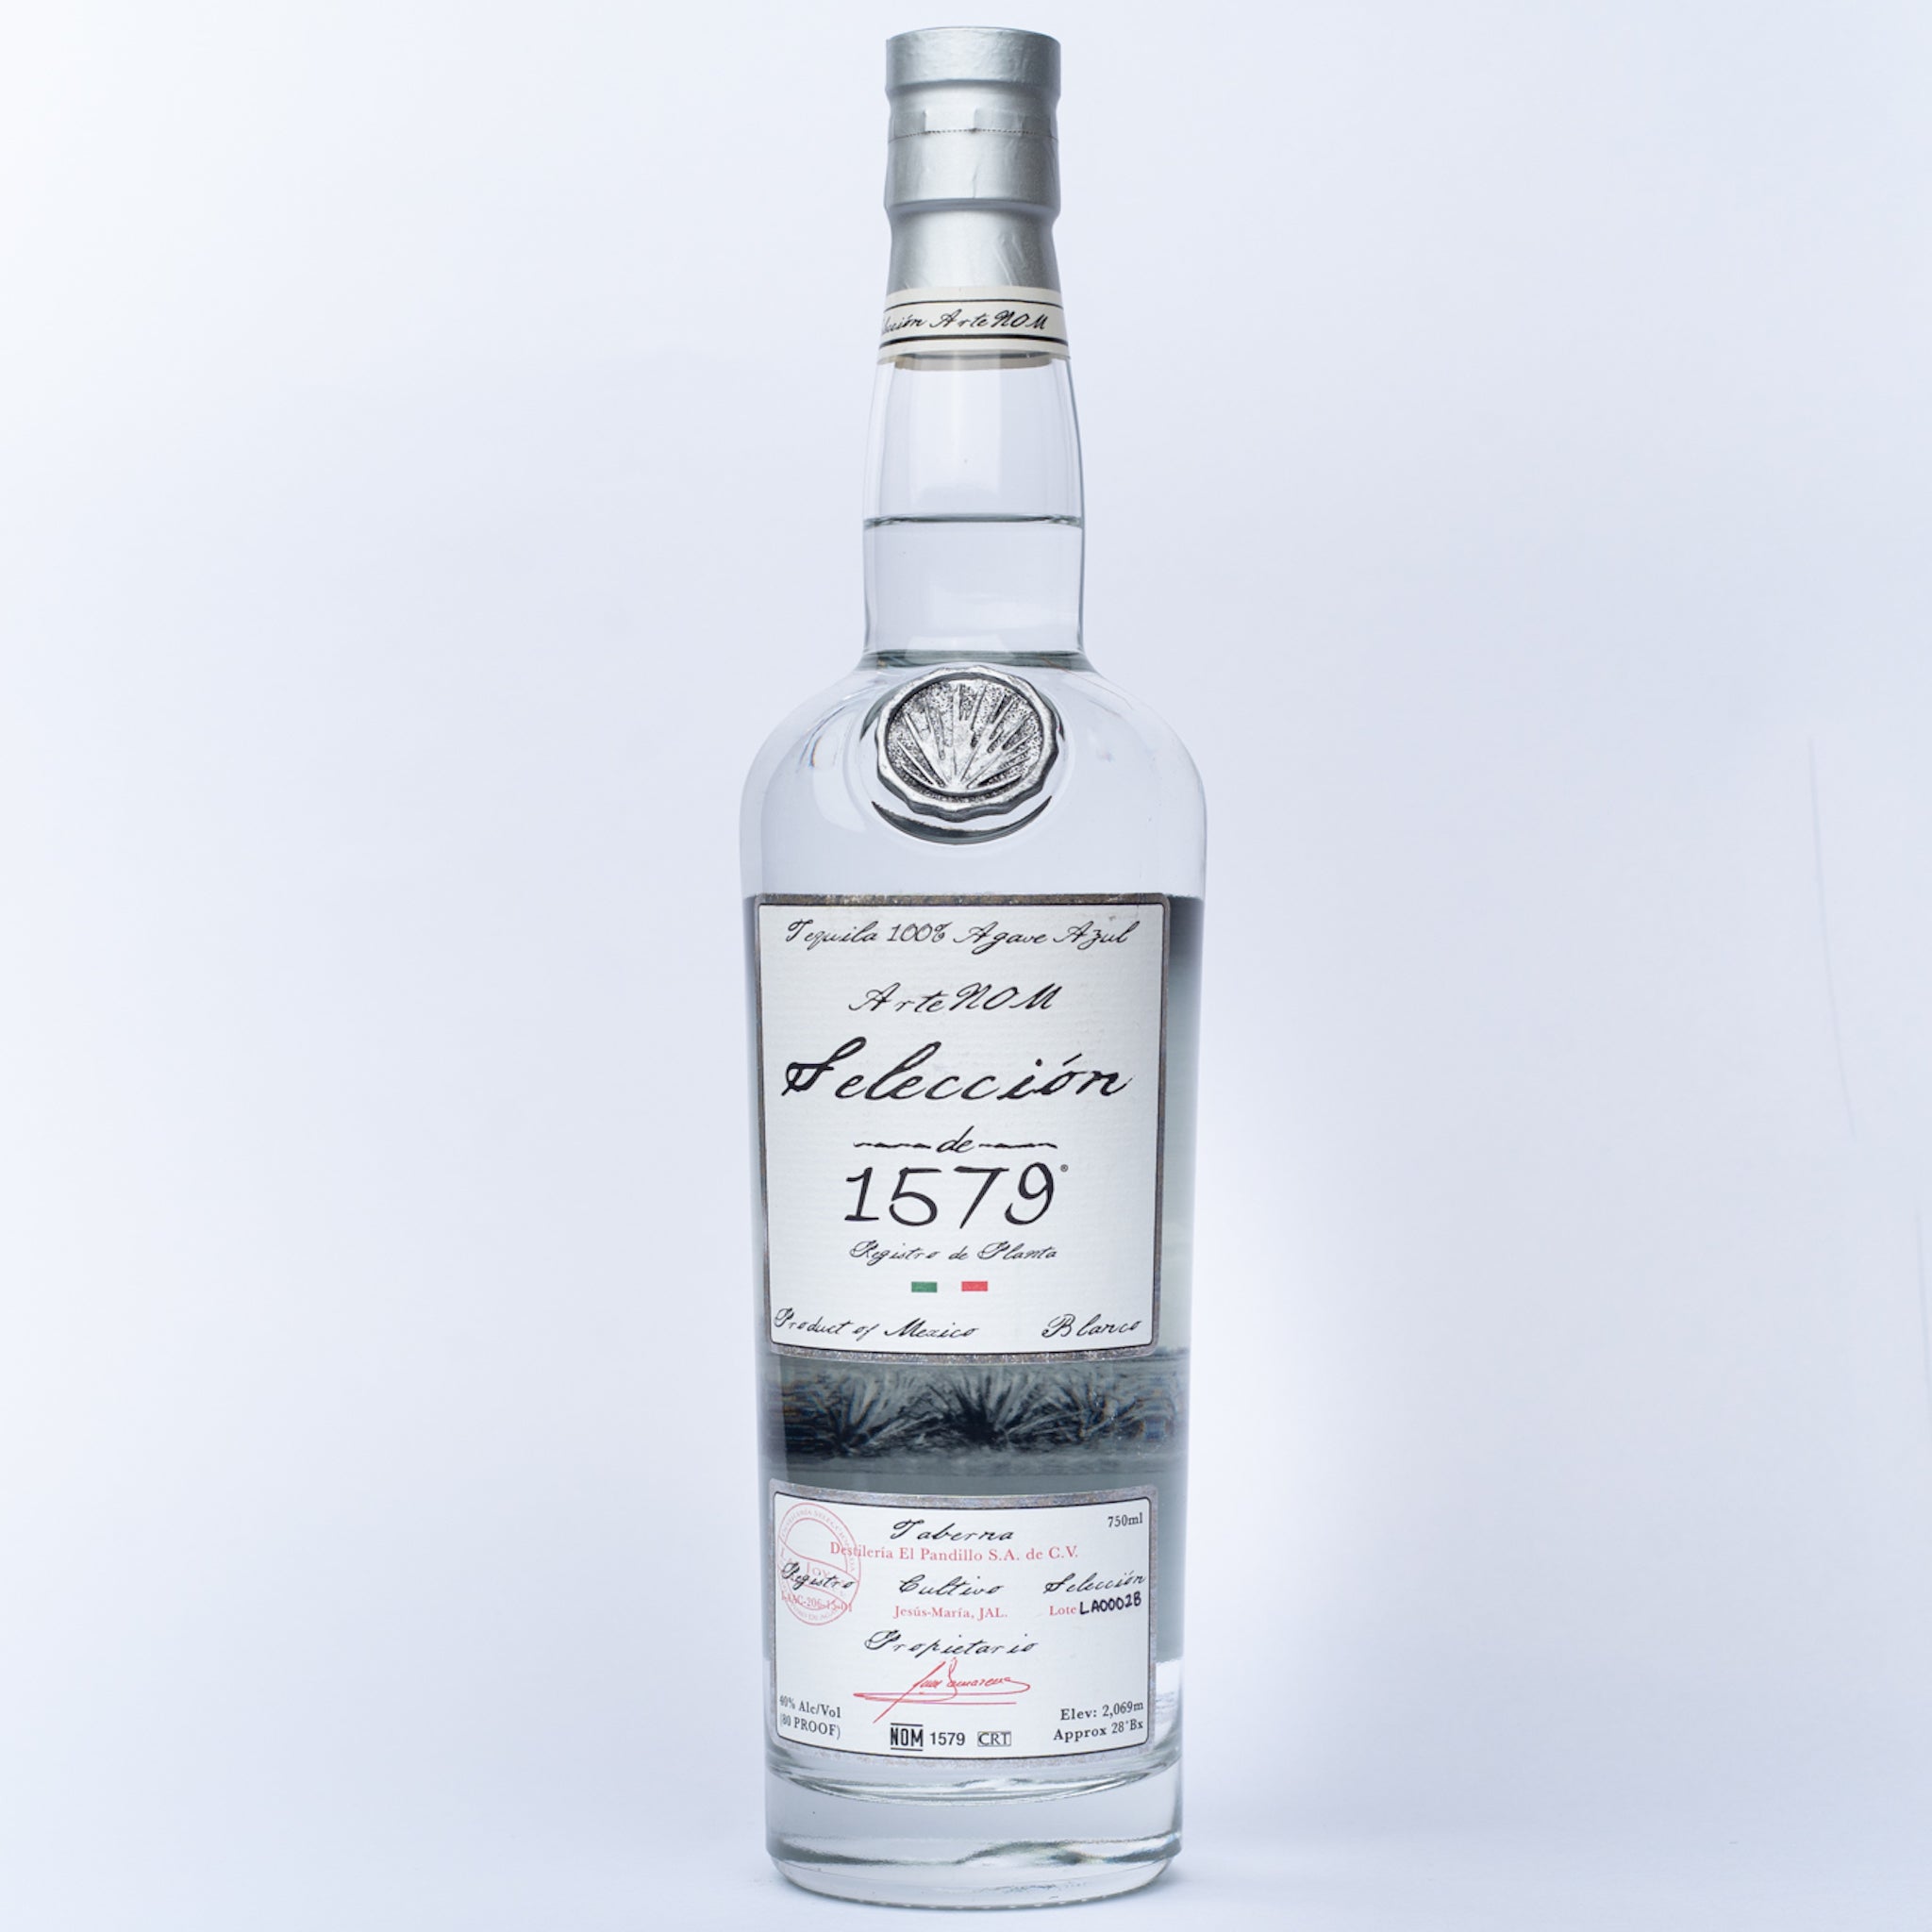 A glass bottle of Seleccion 1579 Tequila.